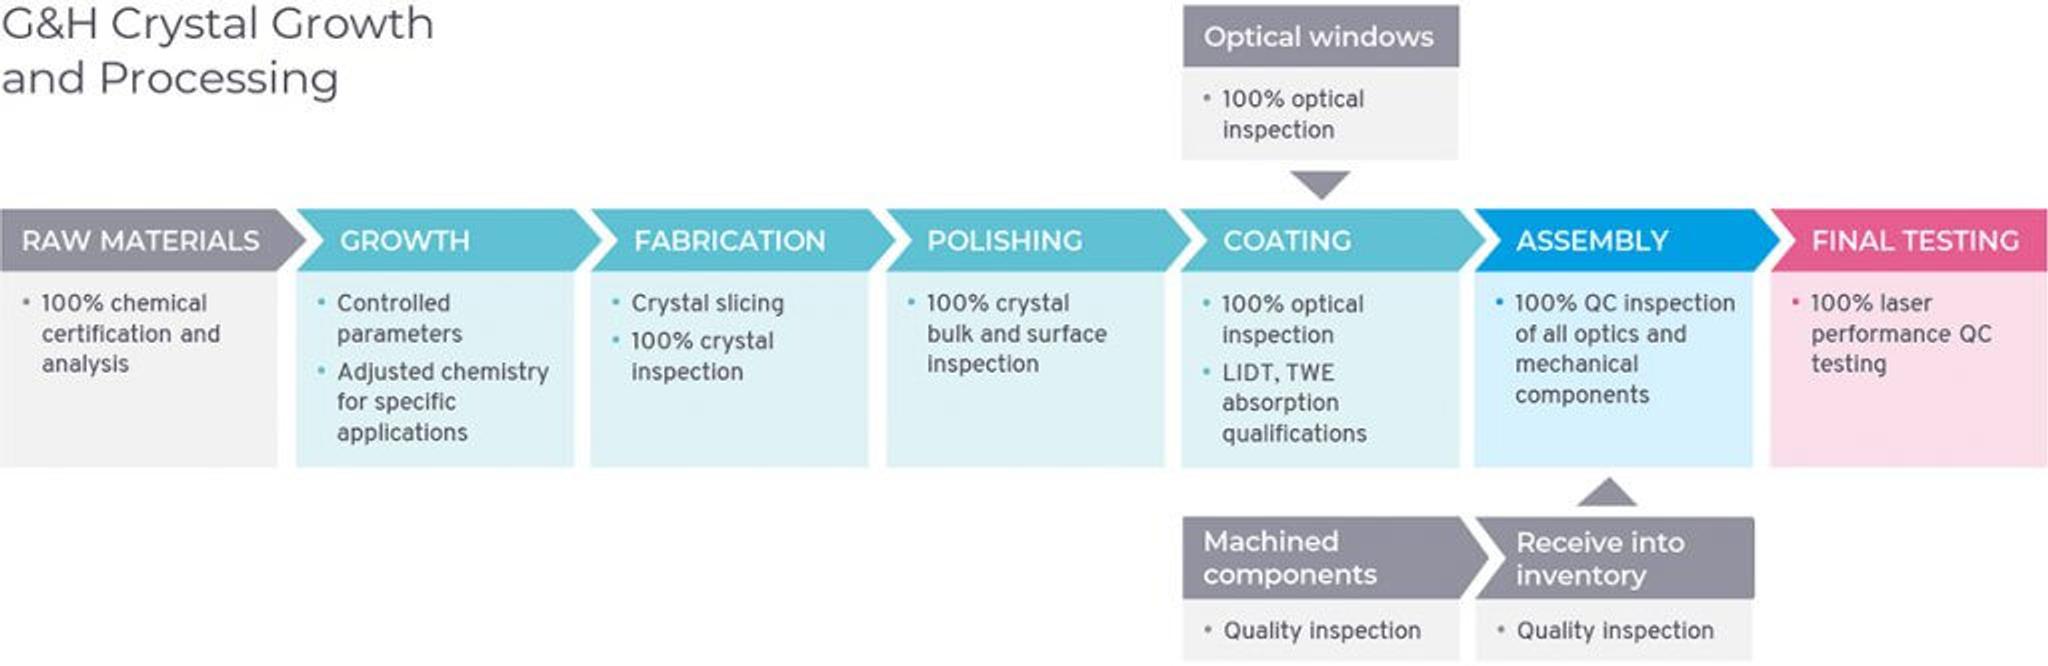 G&H Crystal Growth and Processing